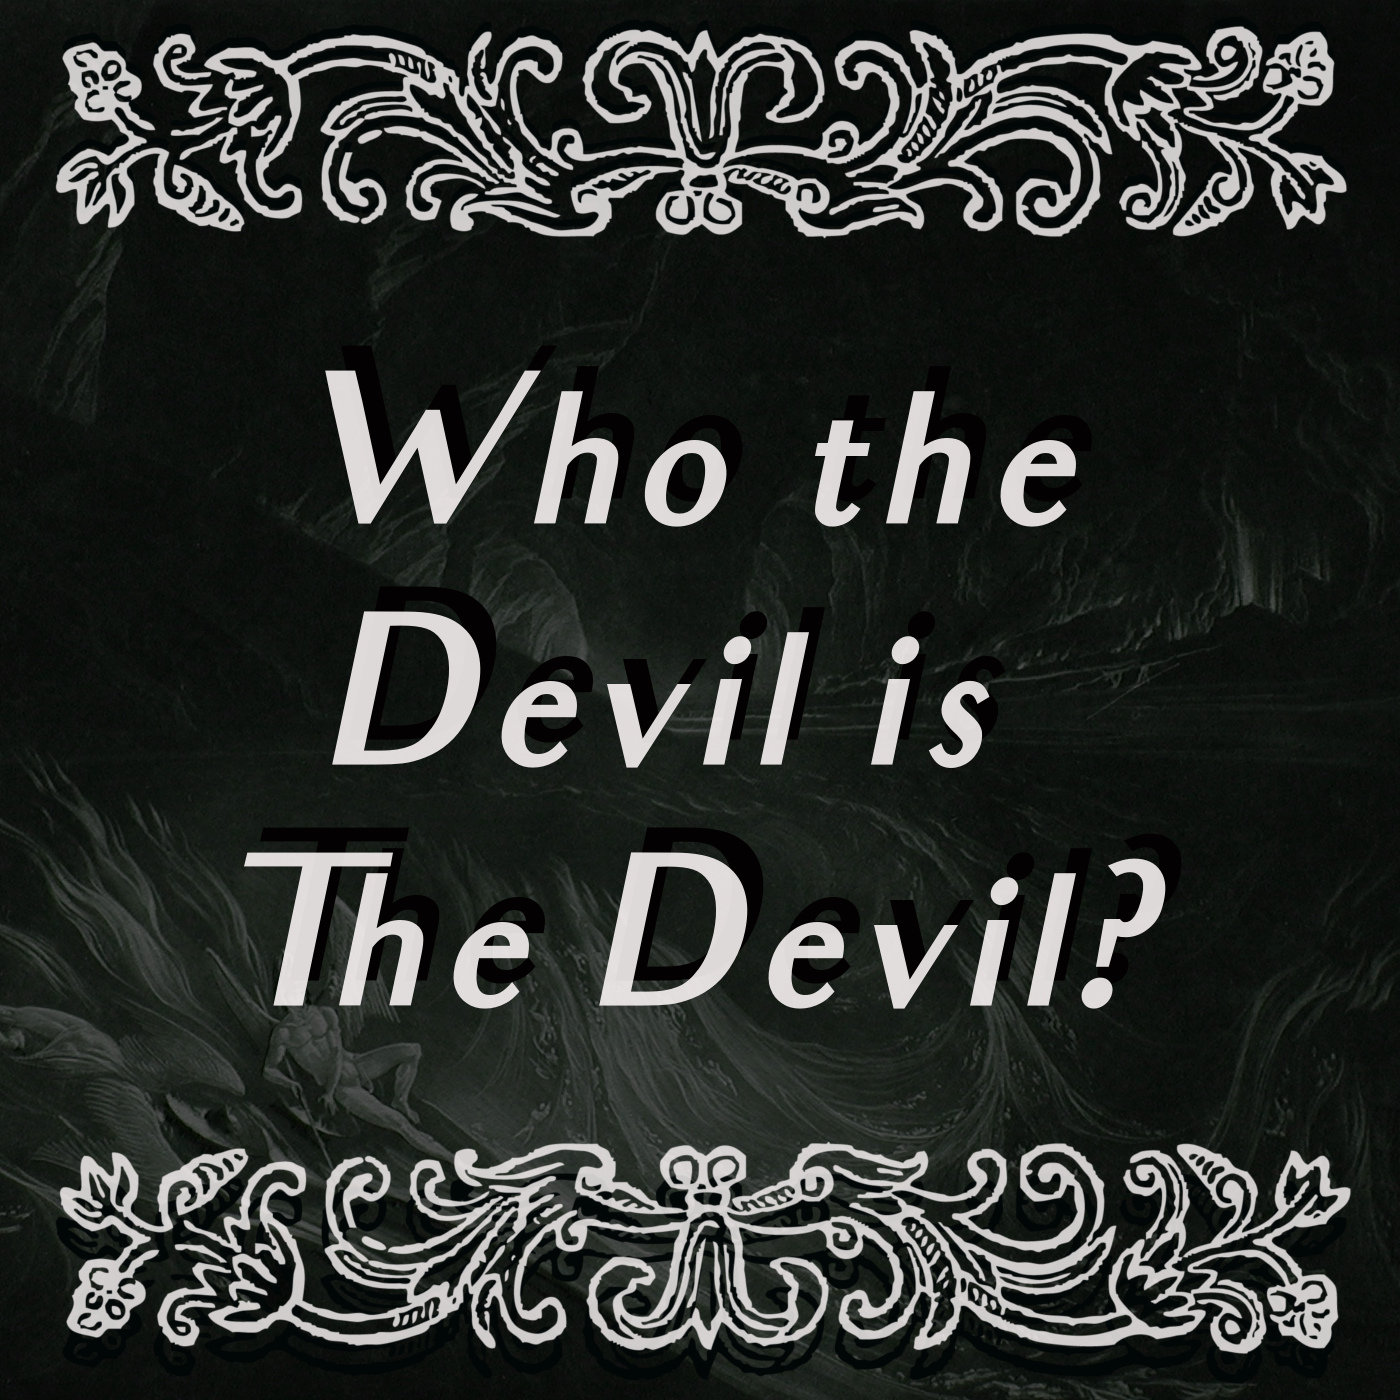 Episode One: Who The Devil is The Devil?